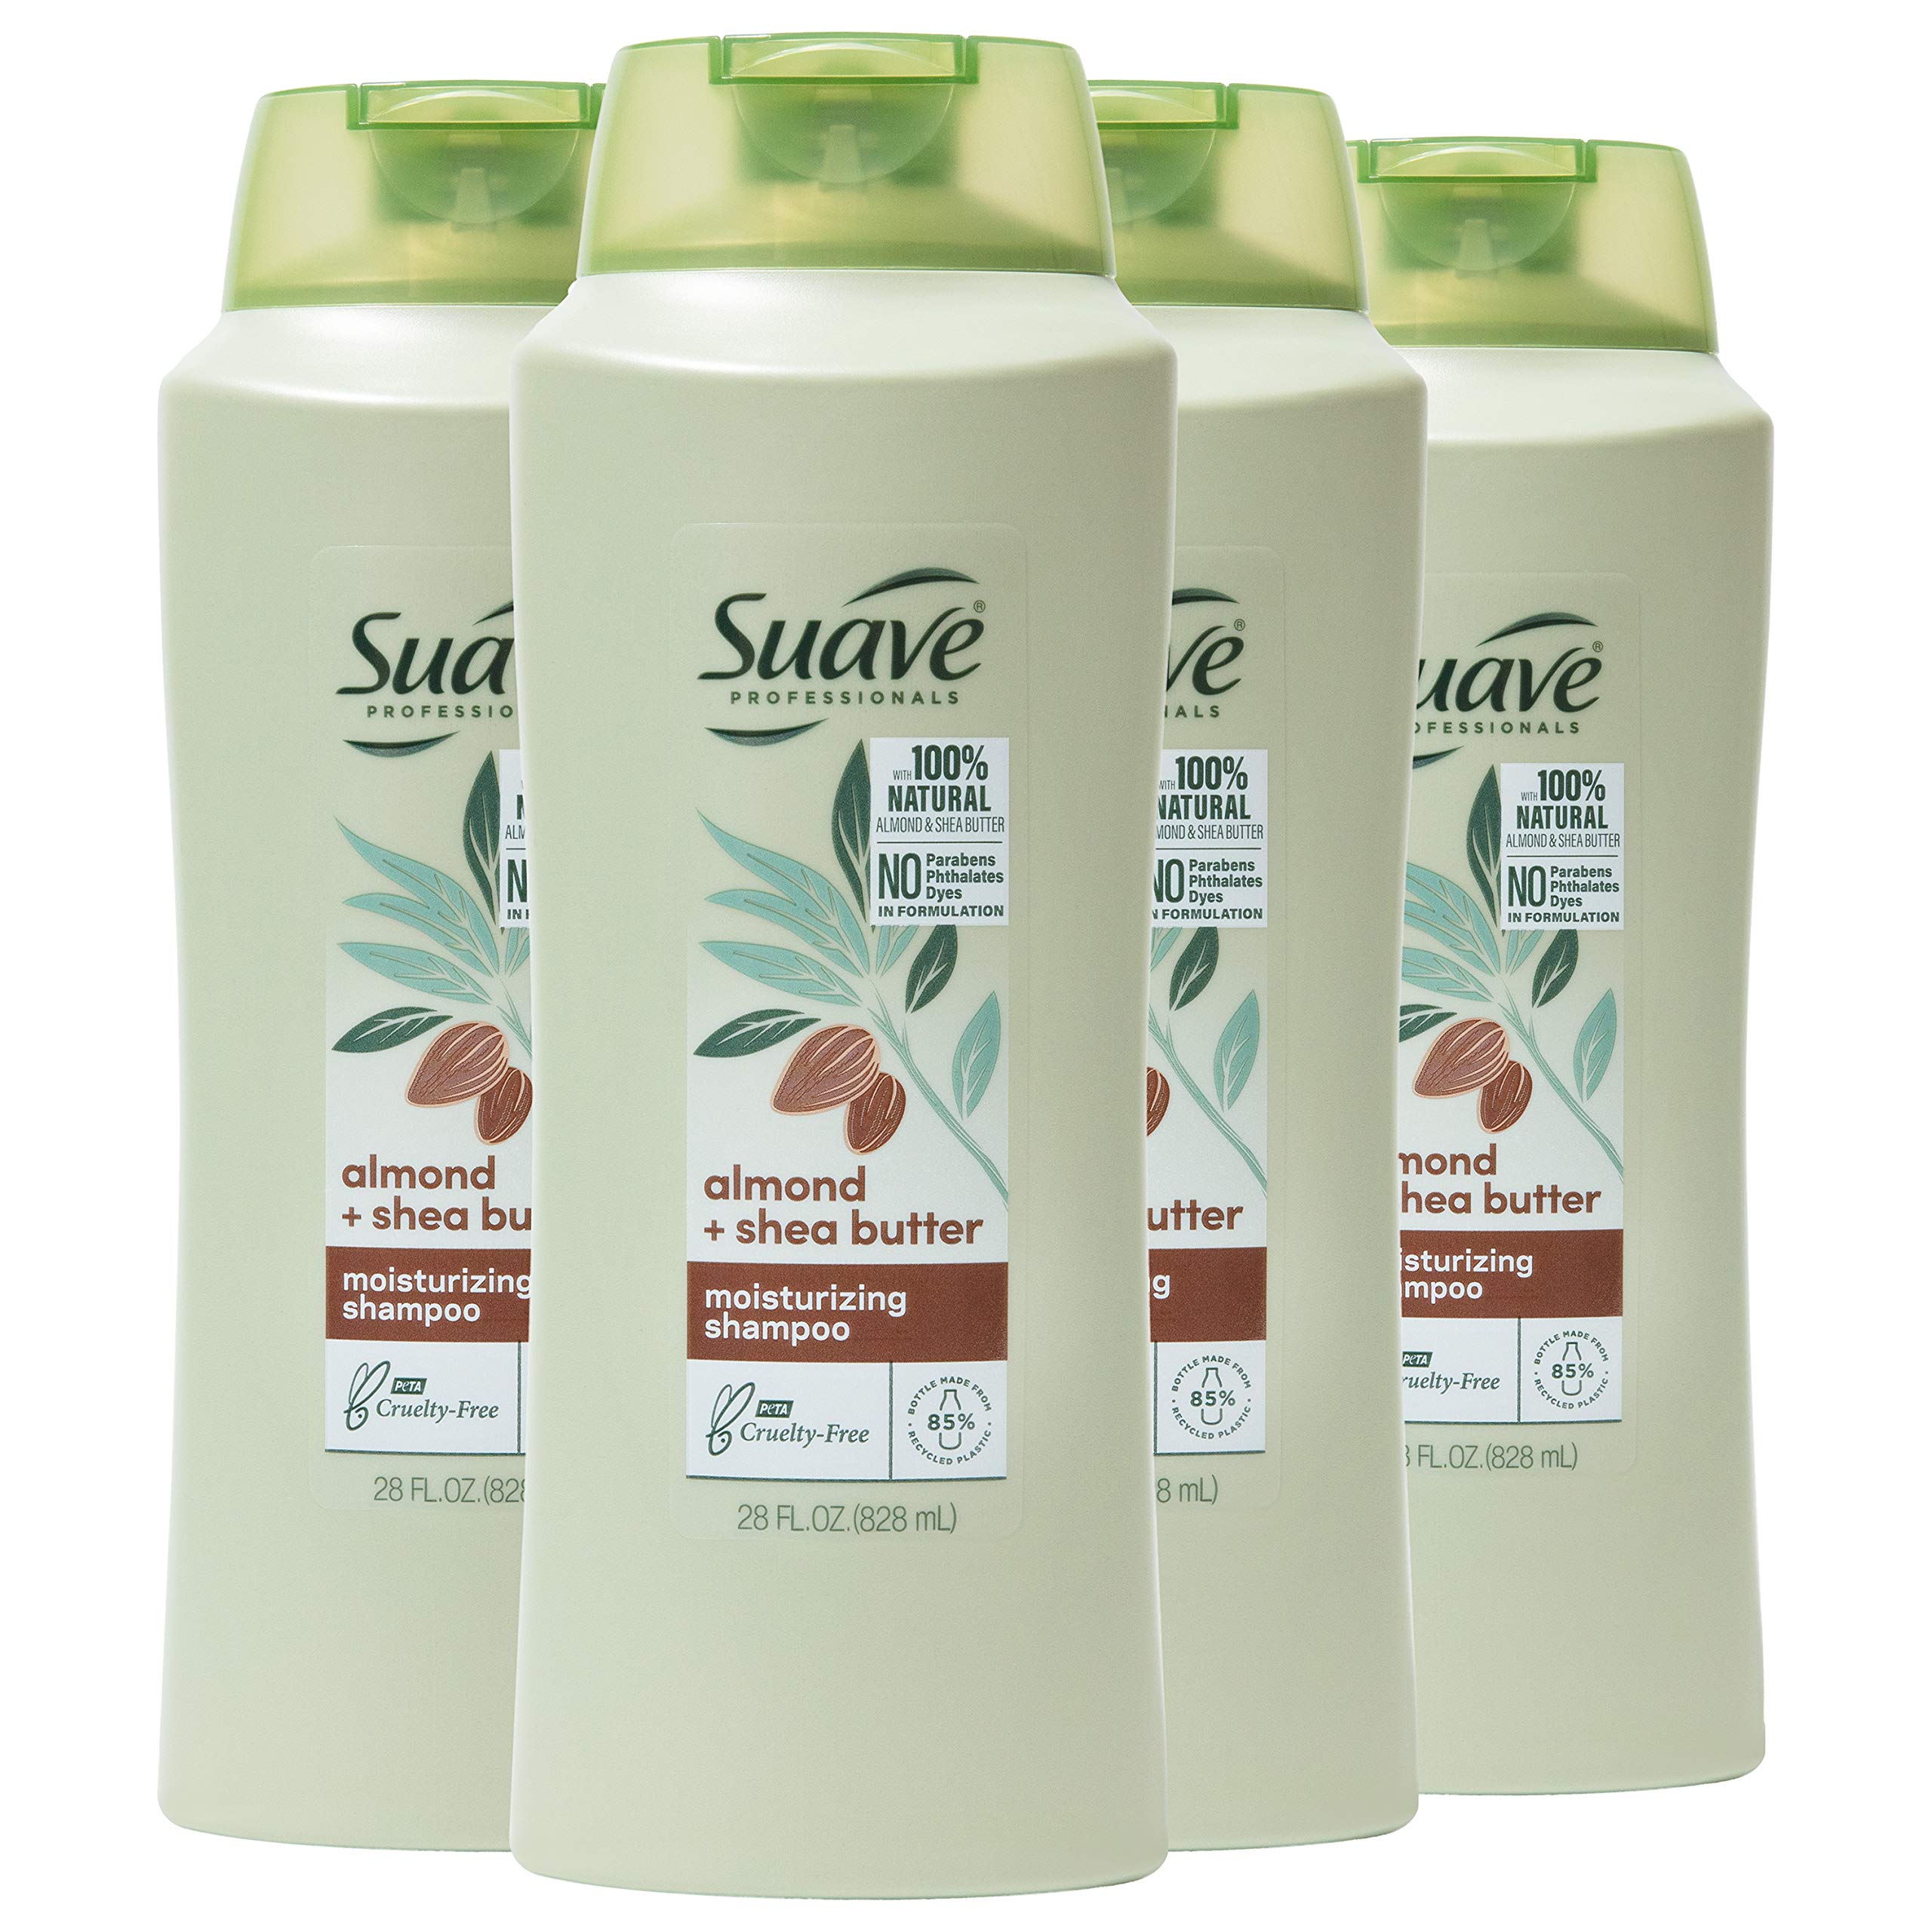 Suave Professionals Moisturizing Shampoo for Dry Hair Almond and Shea Butter Paraben-free and Dye-free 28 oz, Pack of 4